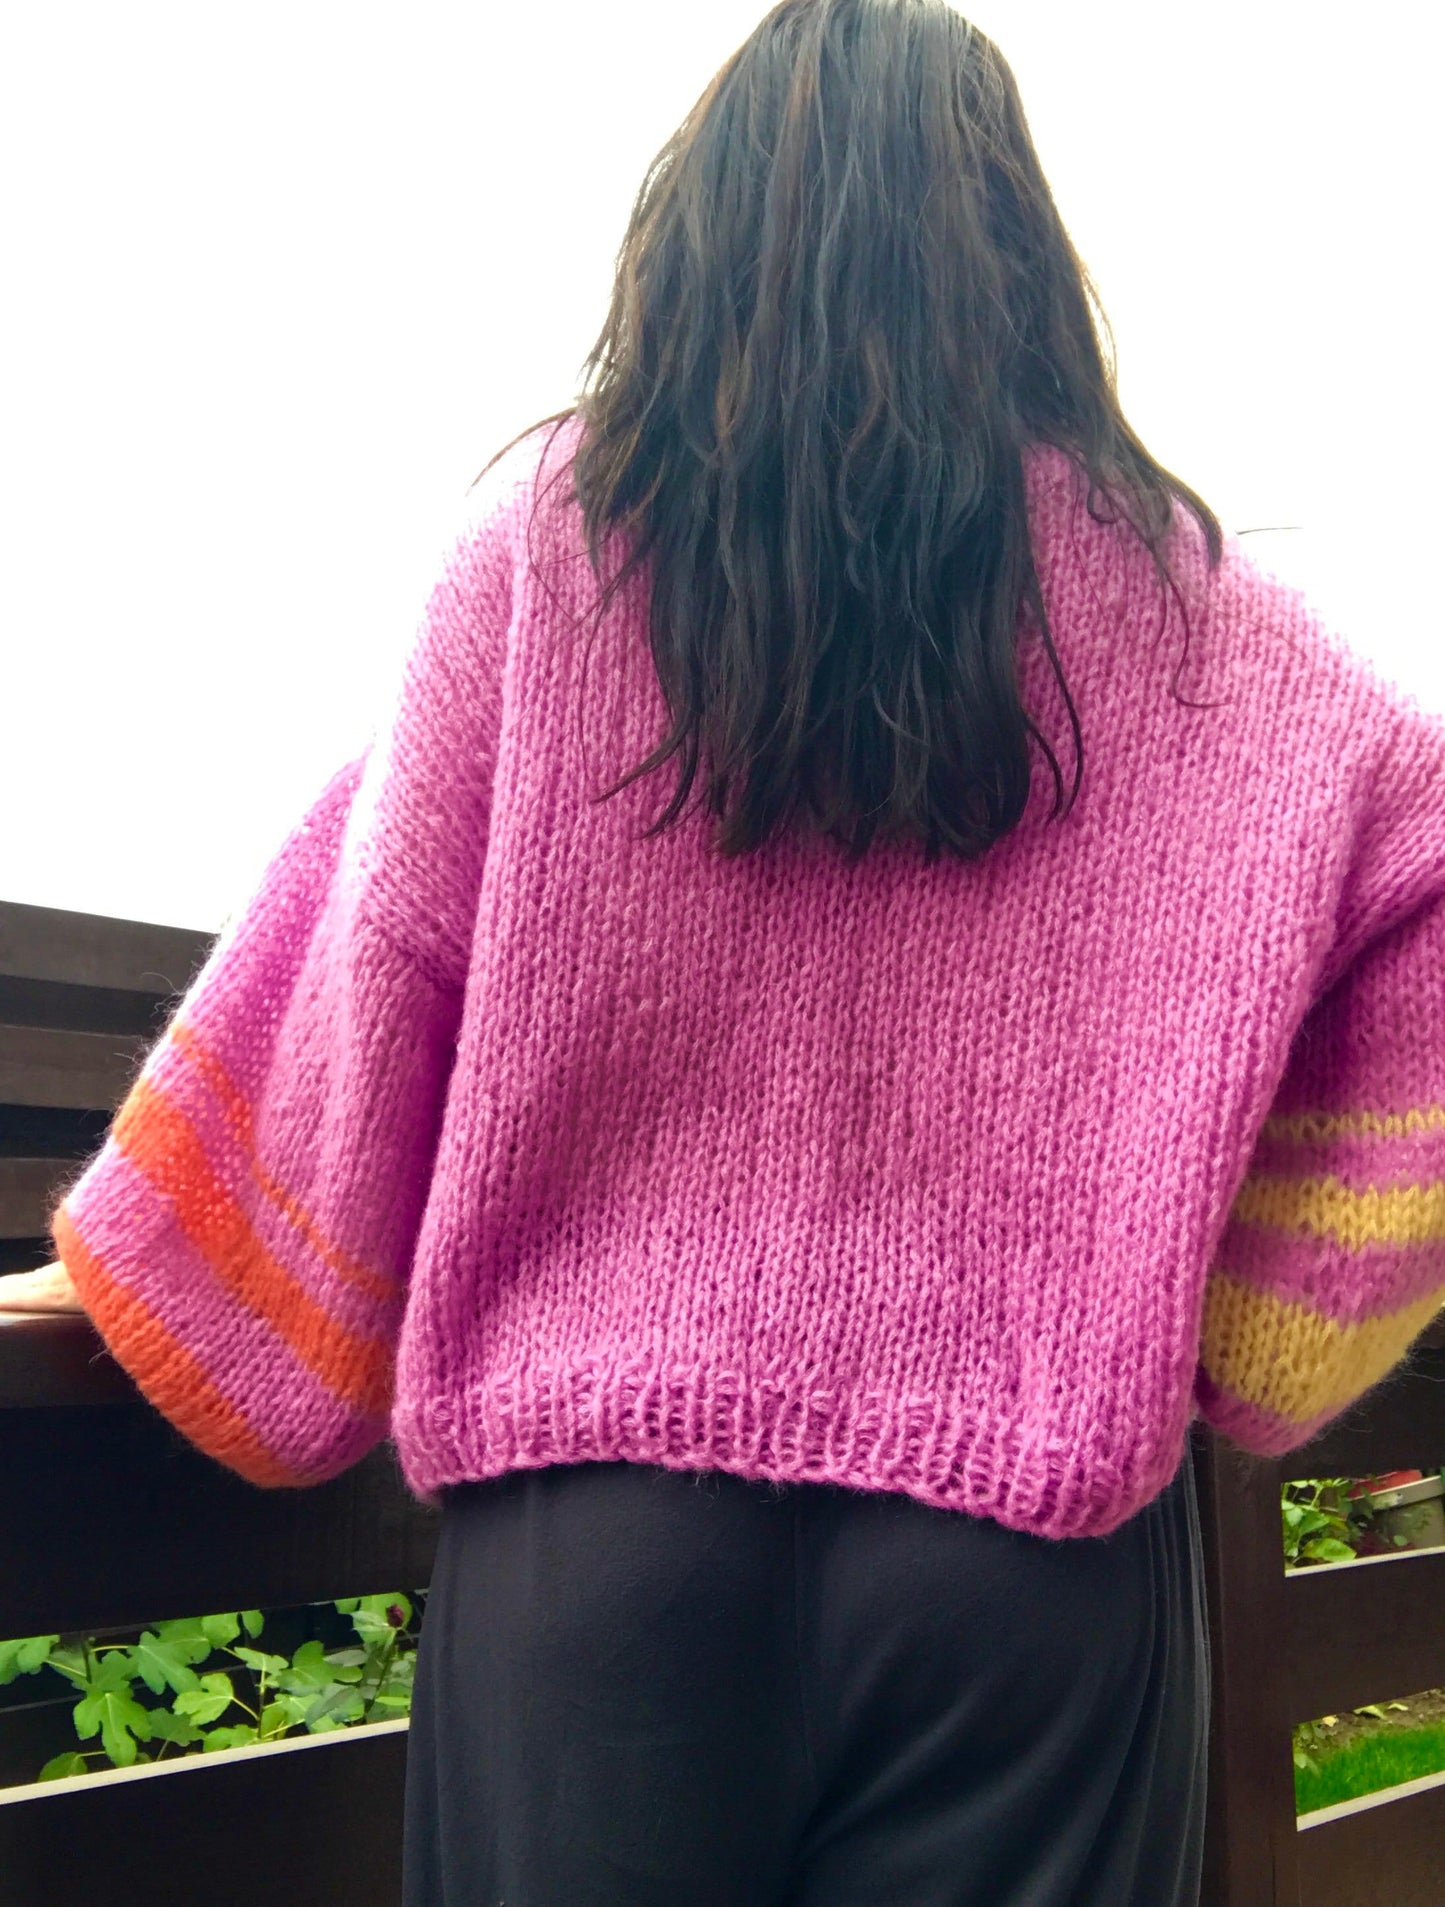 Violet Mohair Sweater, Oversized with Balloon Sleeves, Striped Sleeves, Light Soft Jumper, Purple Oversized Sweater